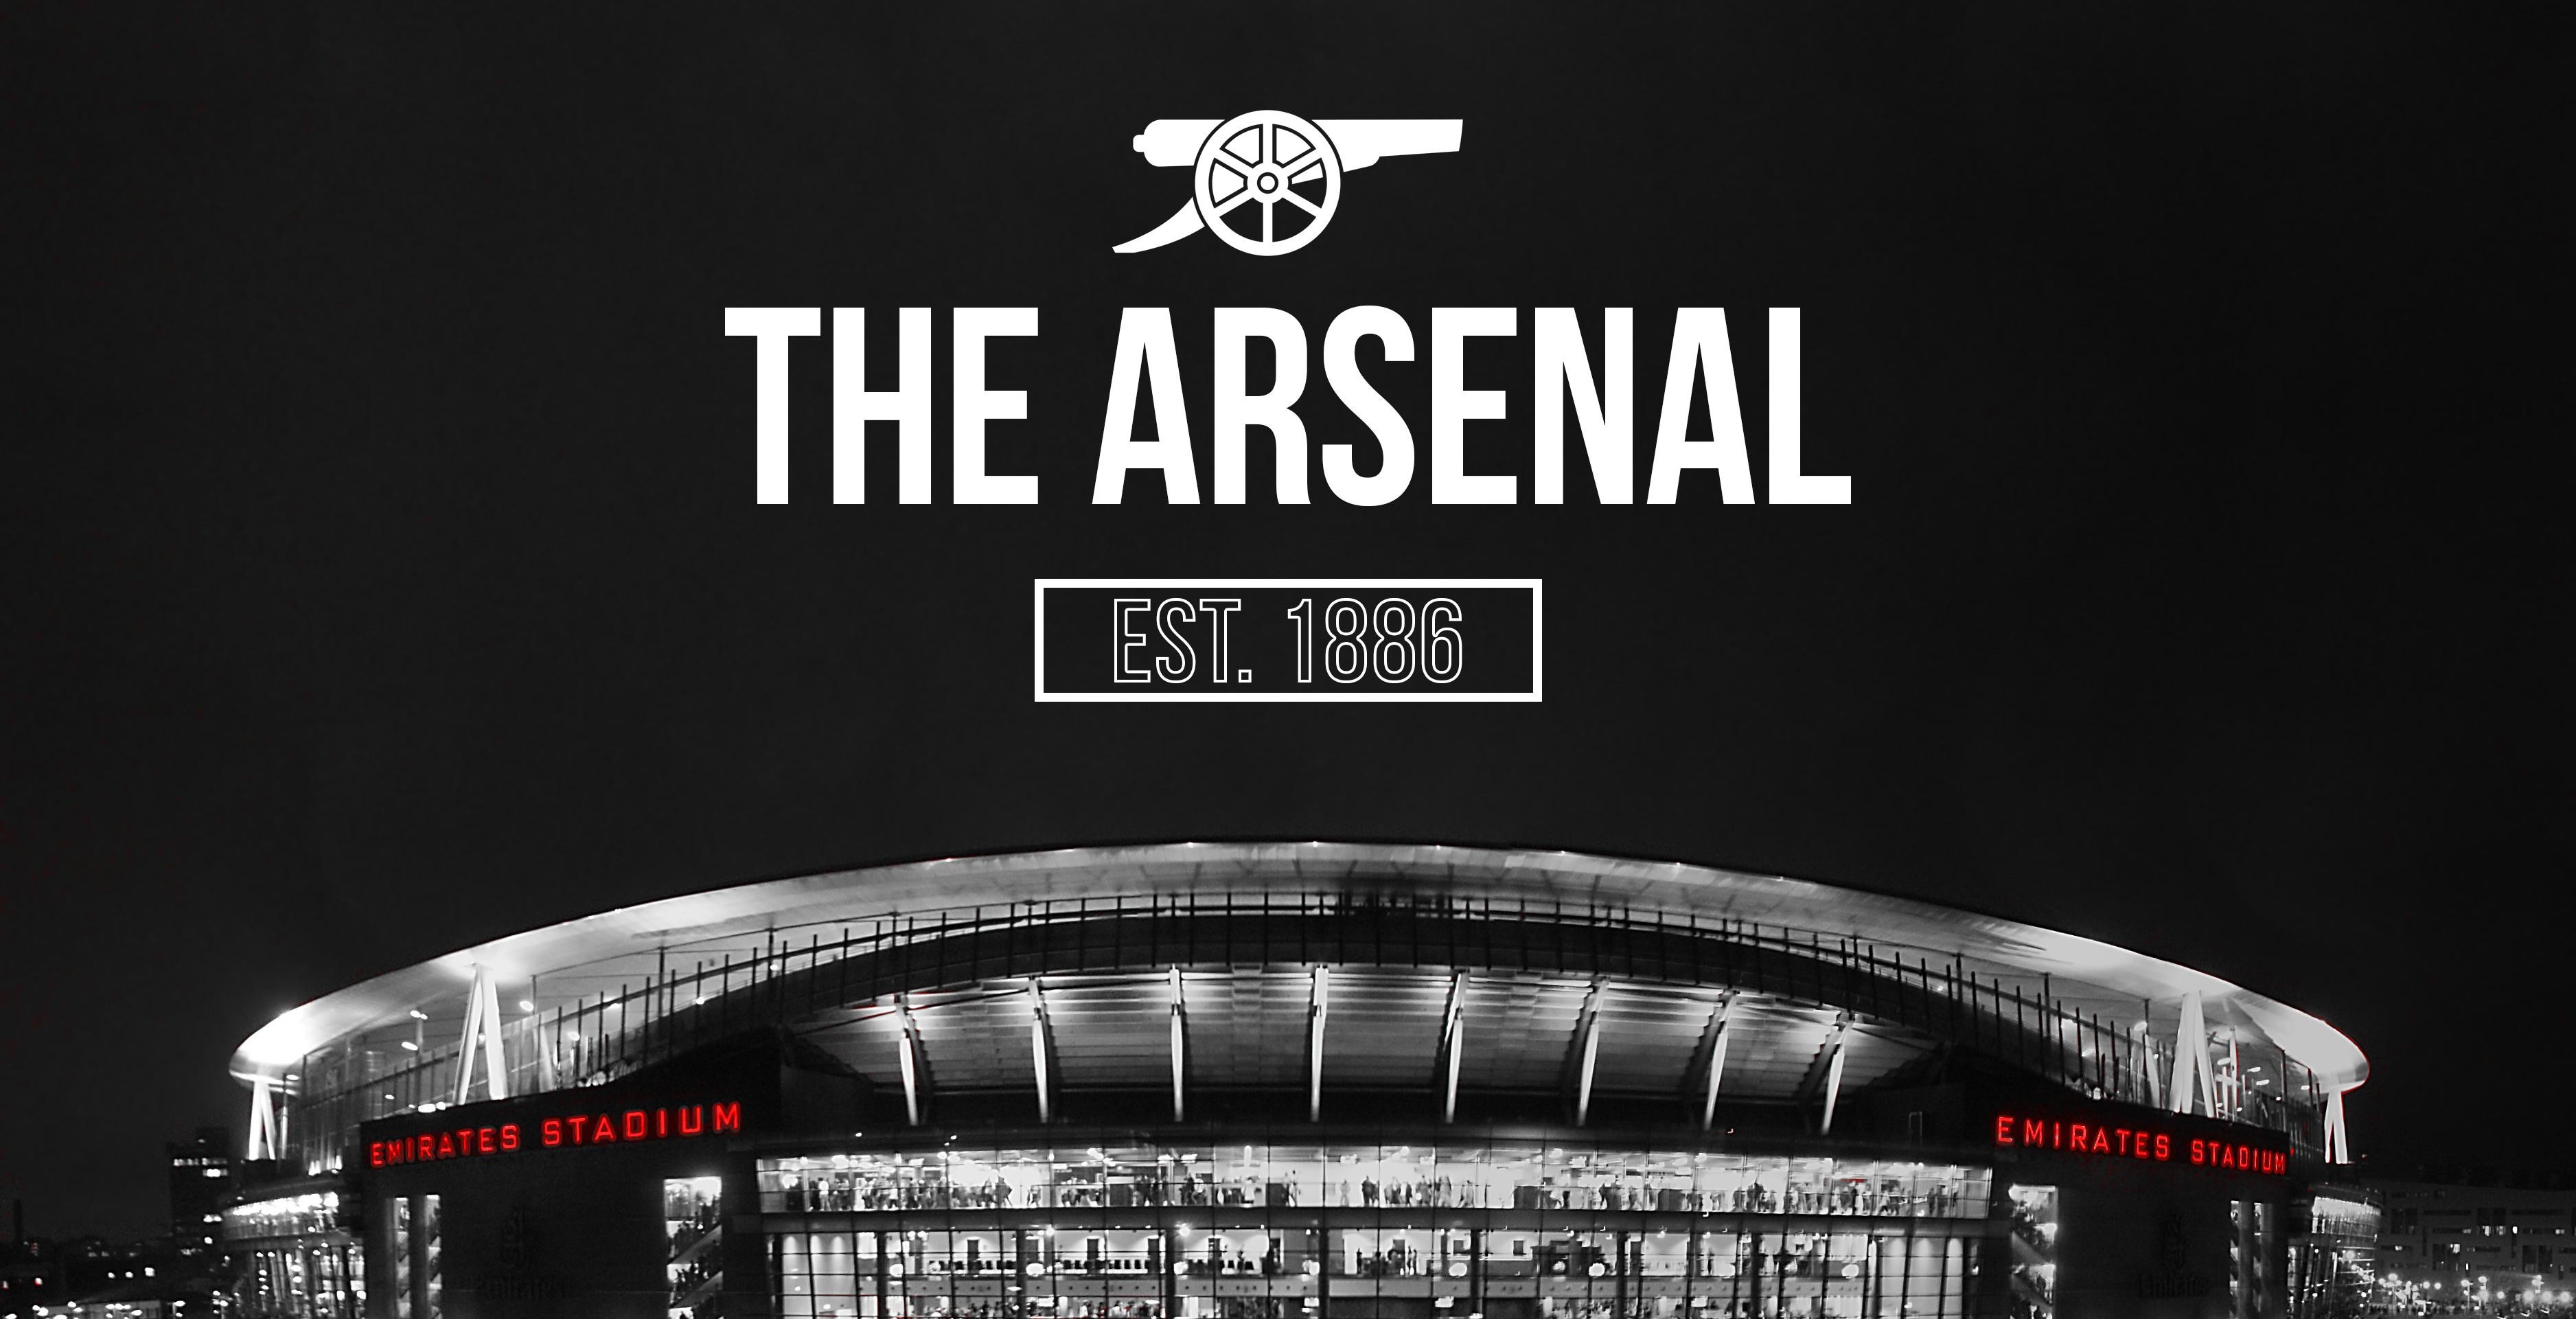 3752x1921 Made an Arsenal wallpaper. (Sorry for funny resolution) ...